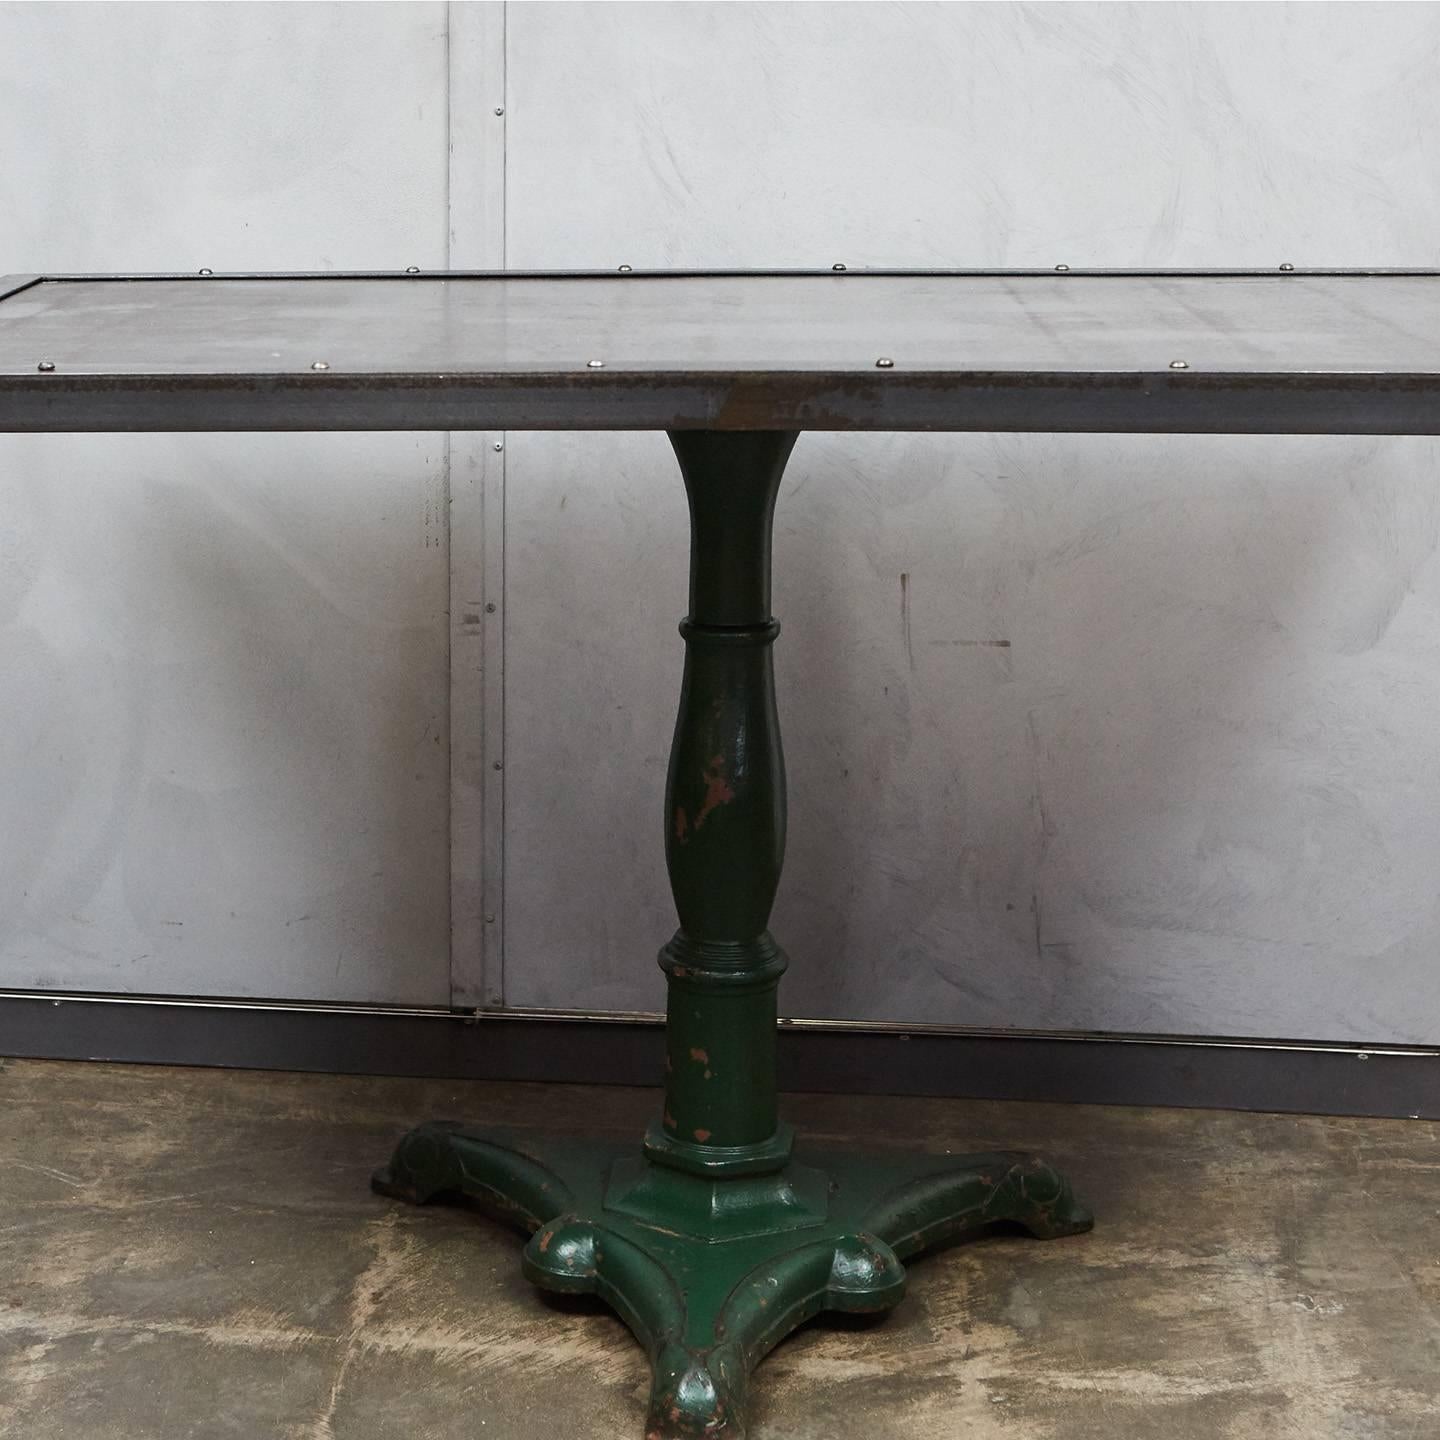 This piece has an antique painted metal base with beautiful details and a unique color. The base has been pared with a large metal top made in our workshop. This table combines the old and the newly crafted for a one of a kind piece suited to a